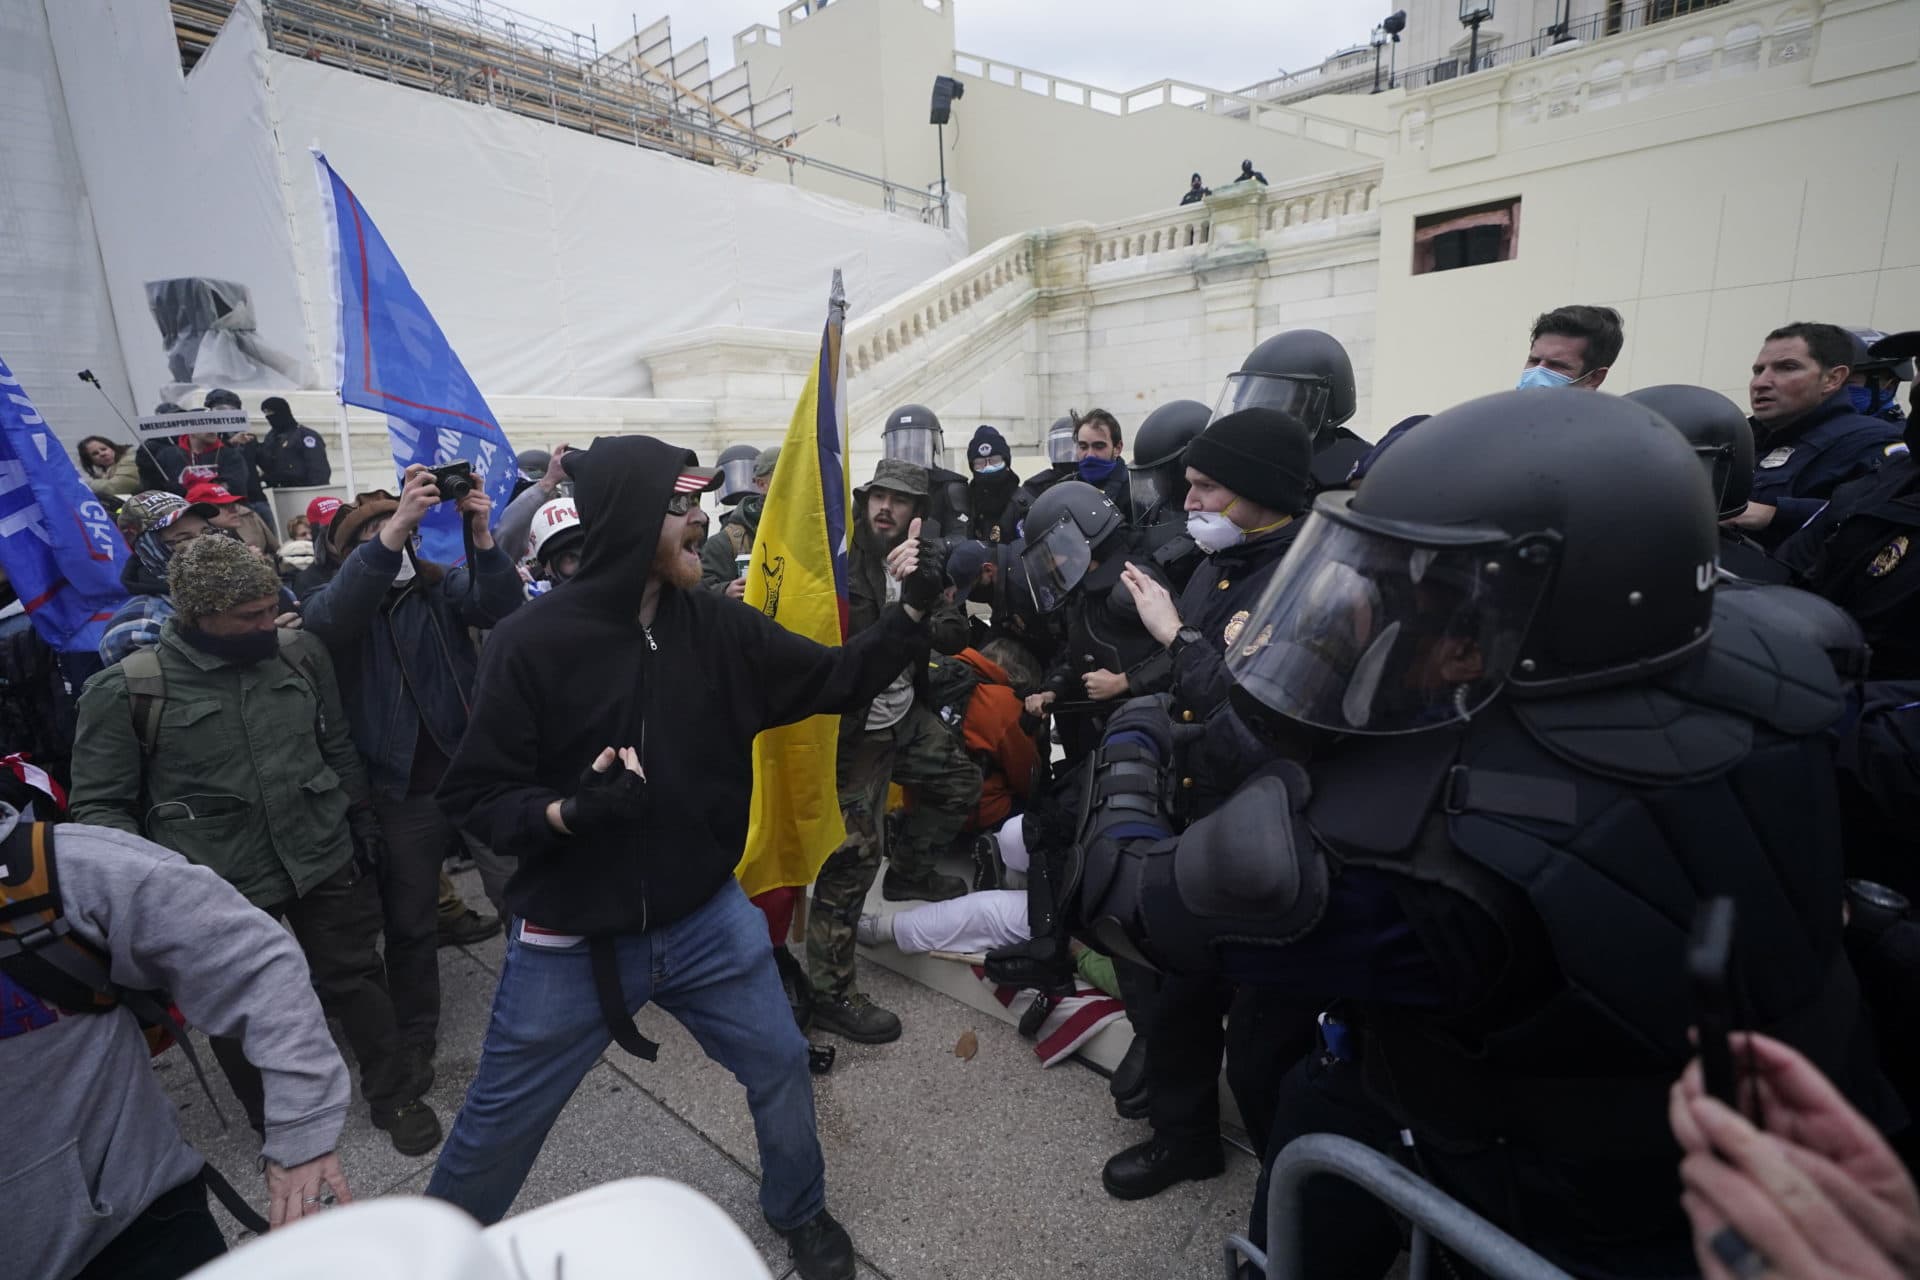 Trump supporters try to break through a police barrier at the Capitol in Washington. (Julio Cortez/AP)